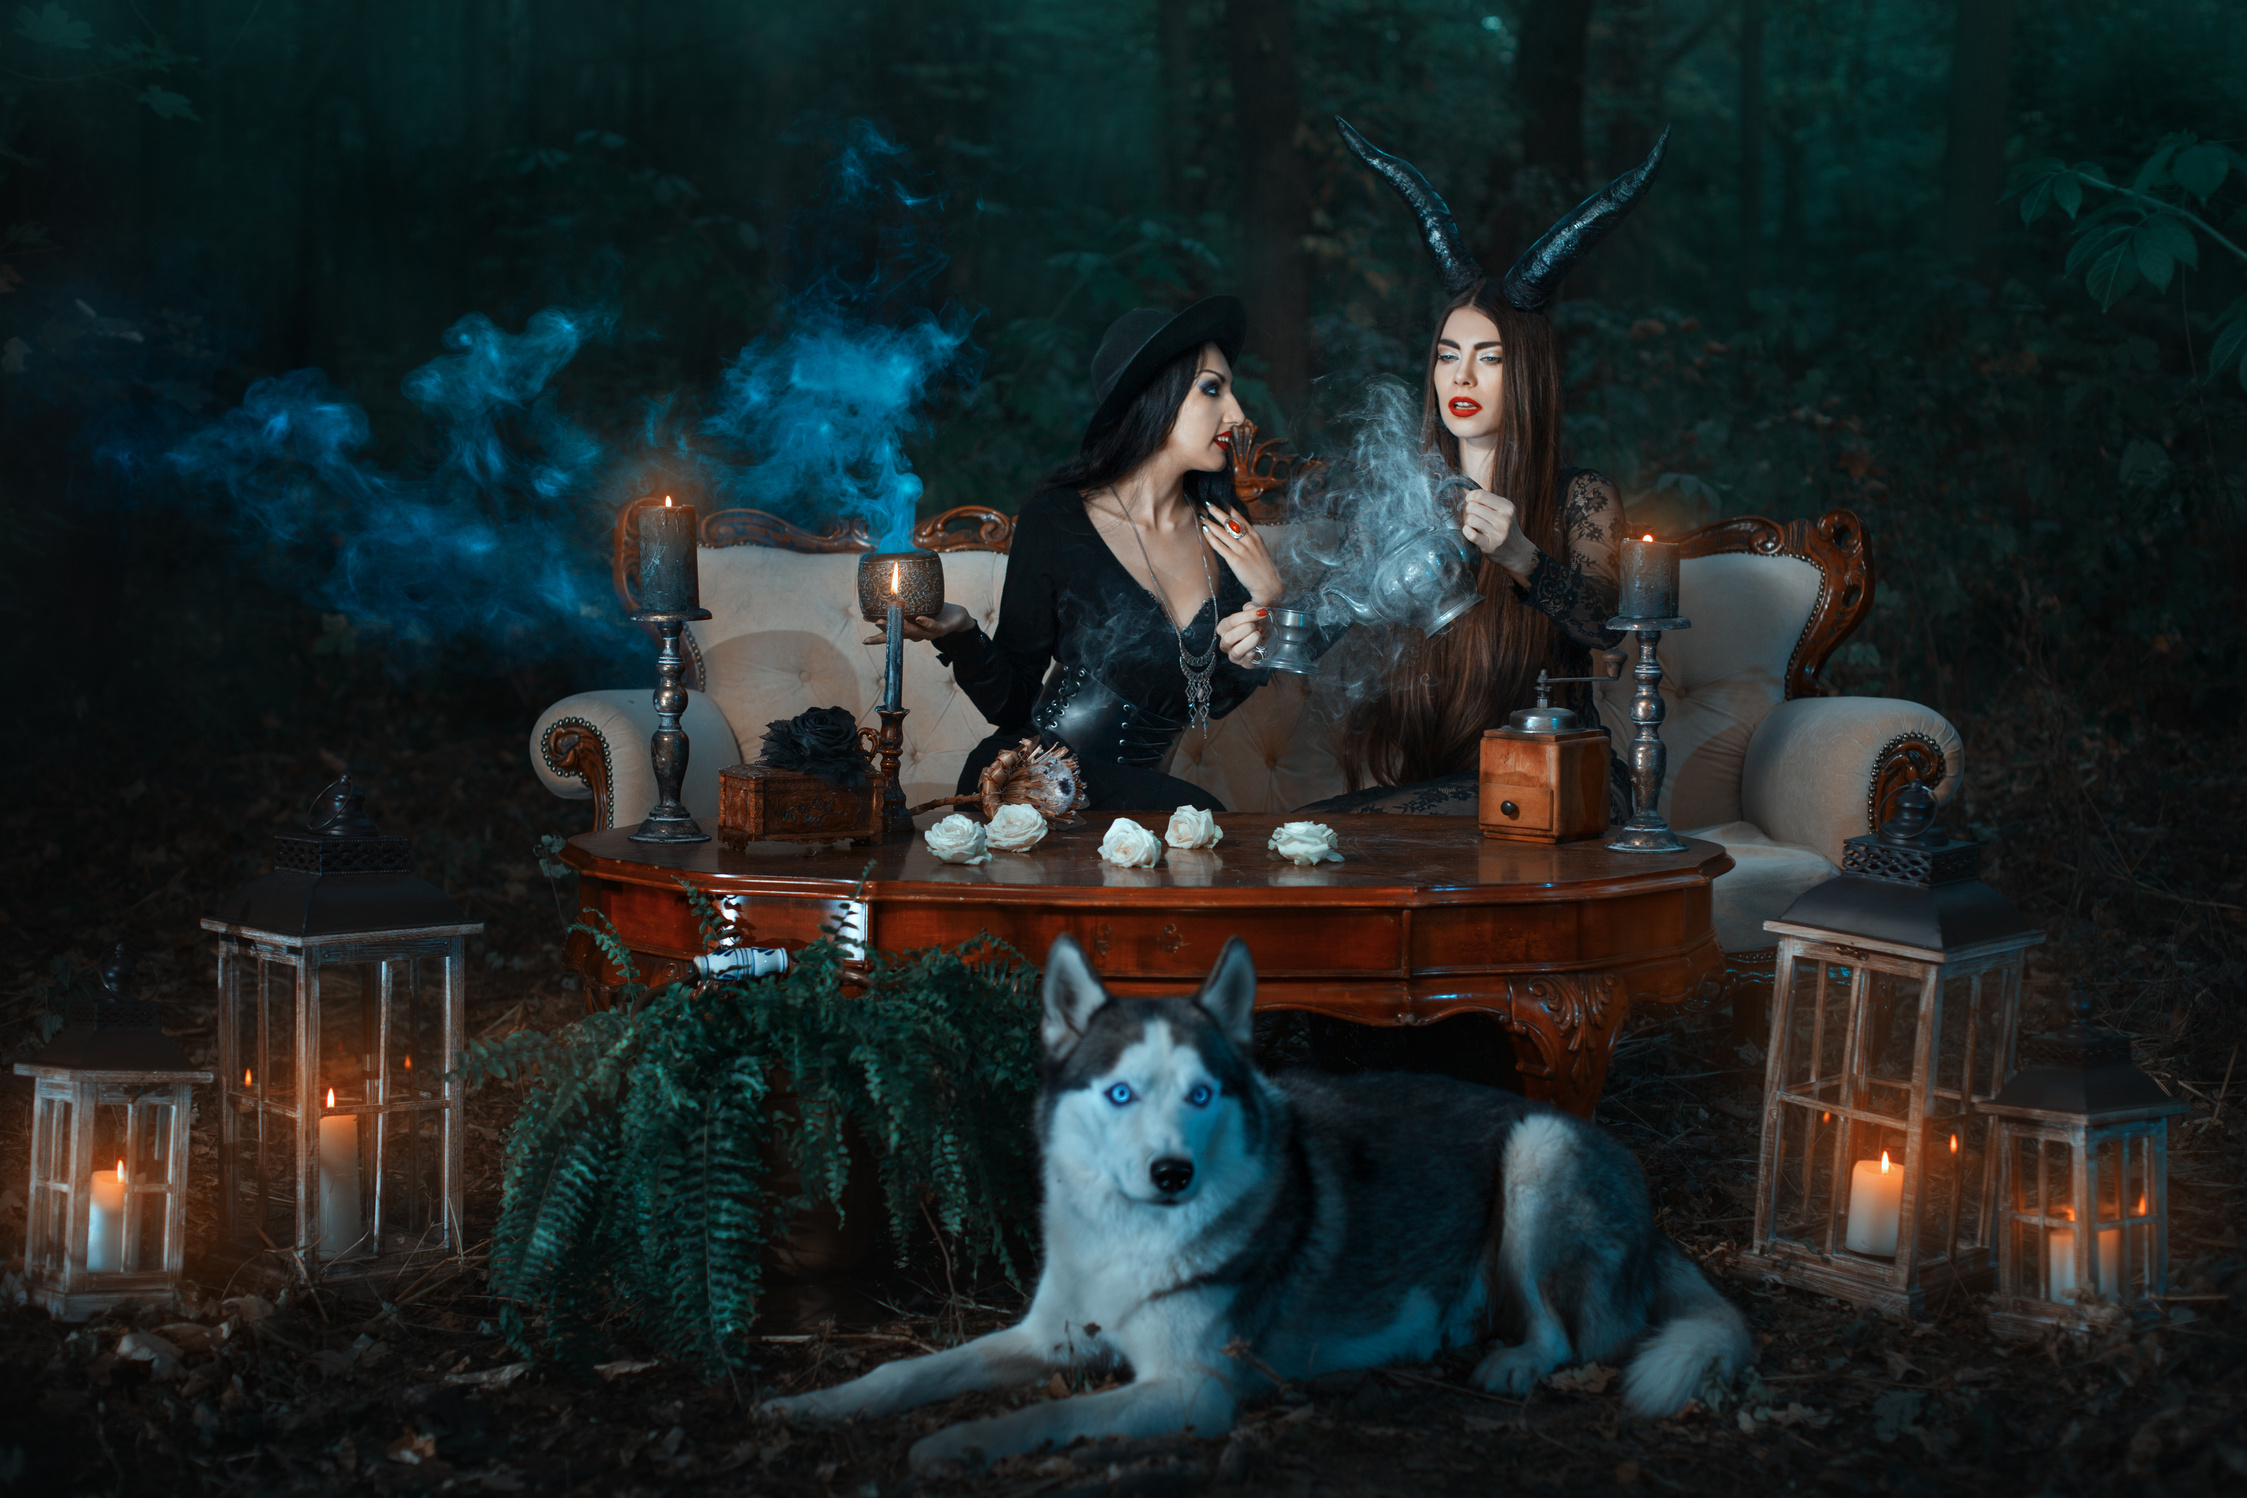 Girls witch in the woods conjure.